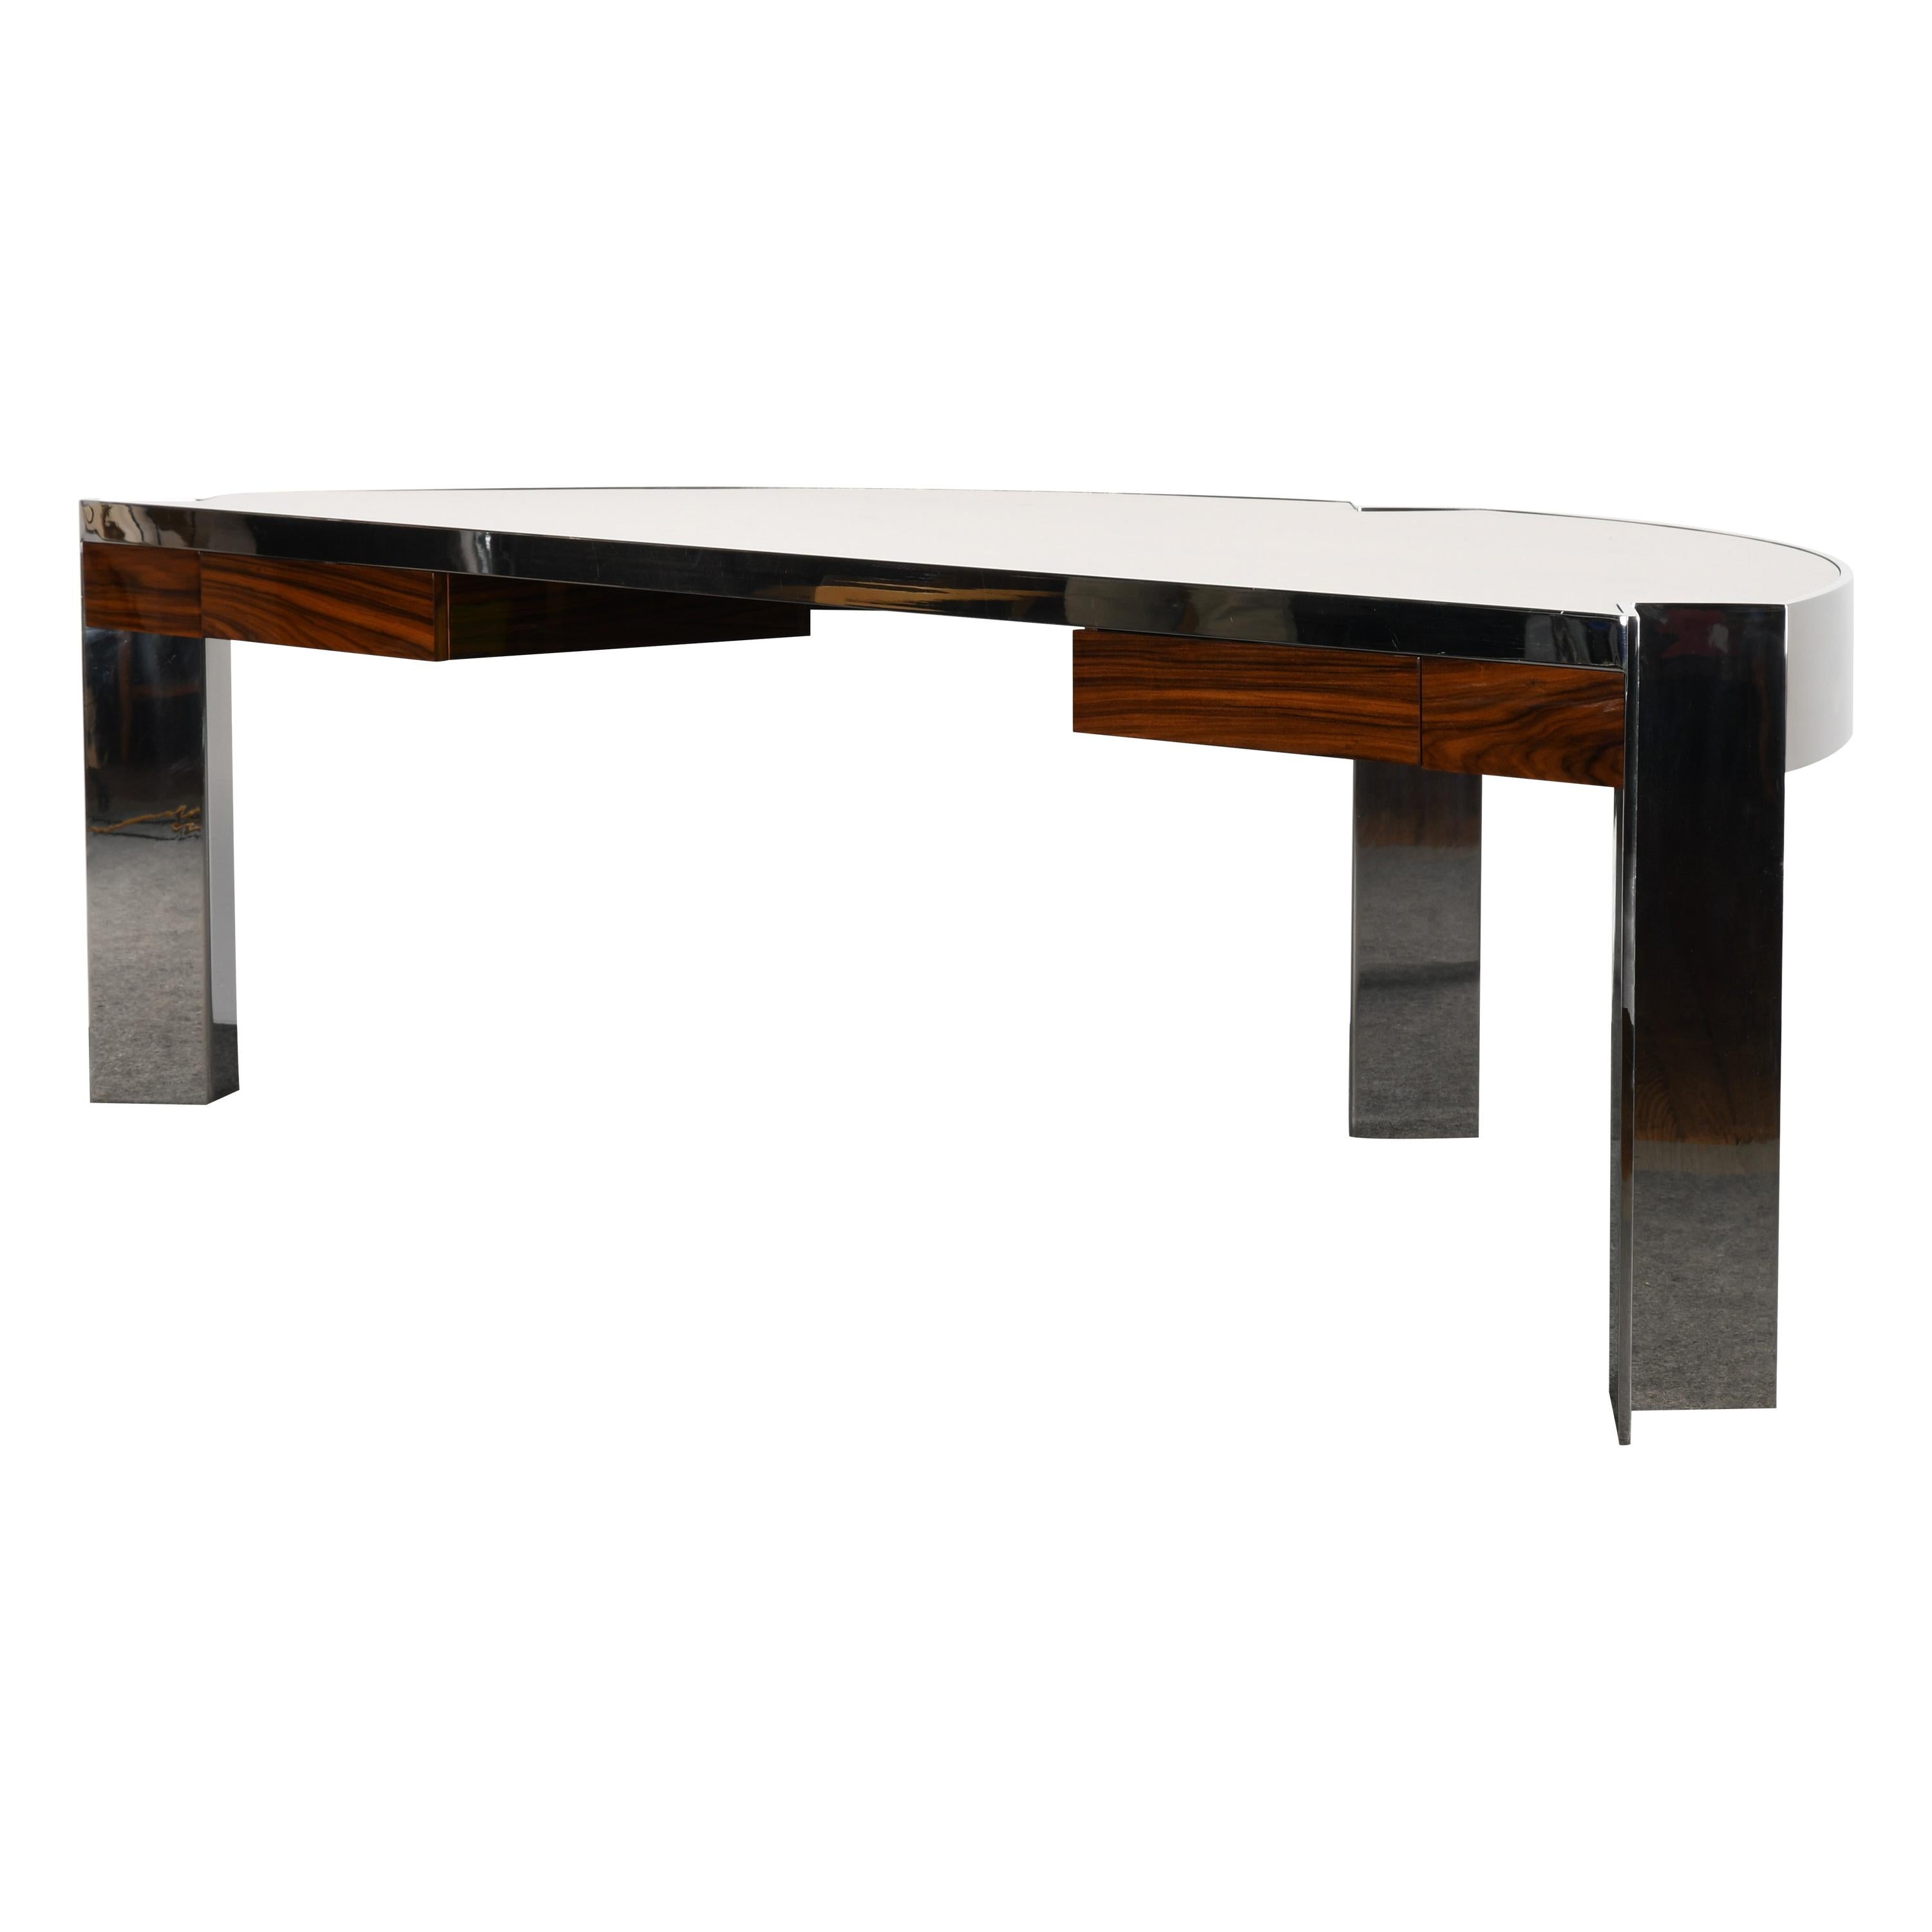 Steel and Rosewood "Mezzaluna" Desk by Leon Rosen for Pace Collection, 1970s